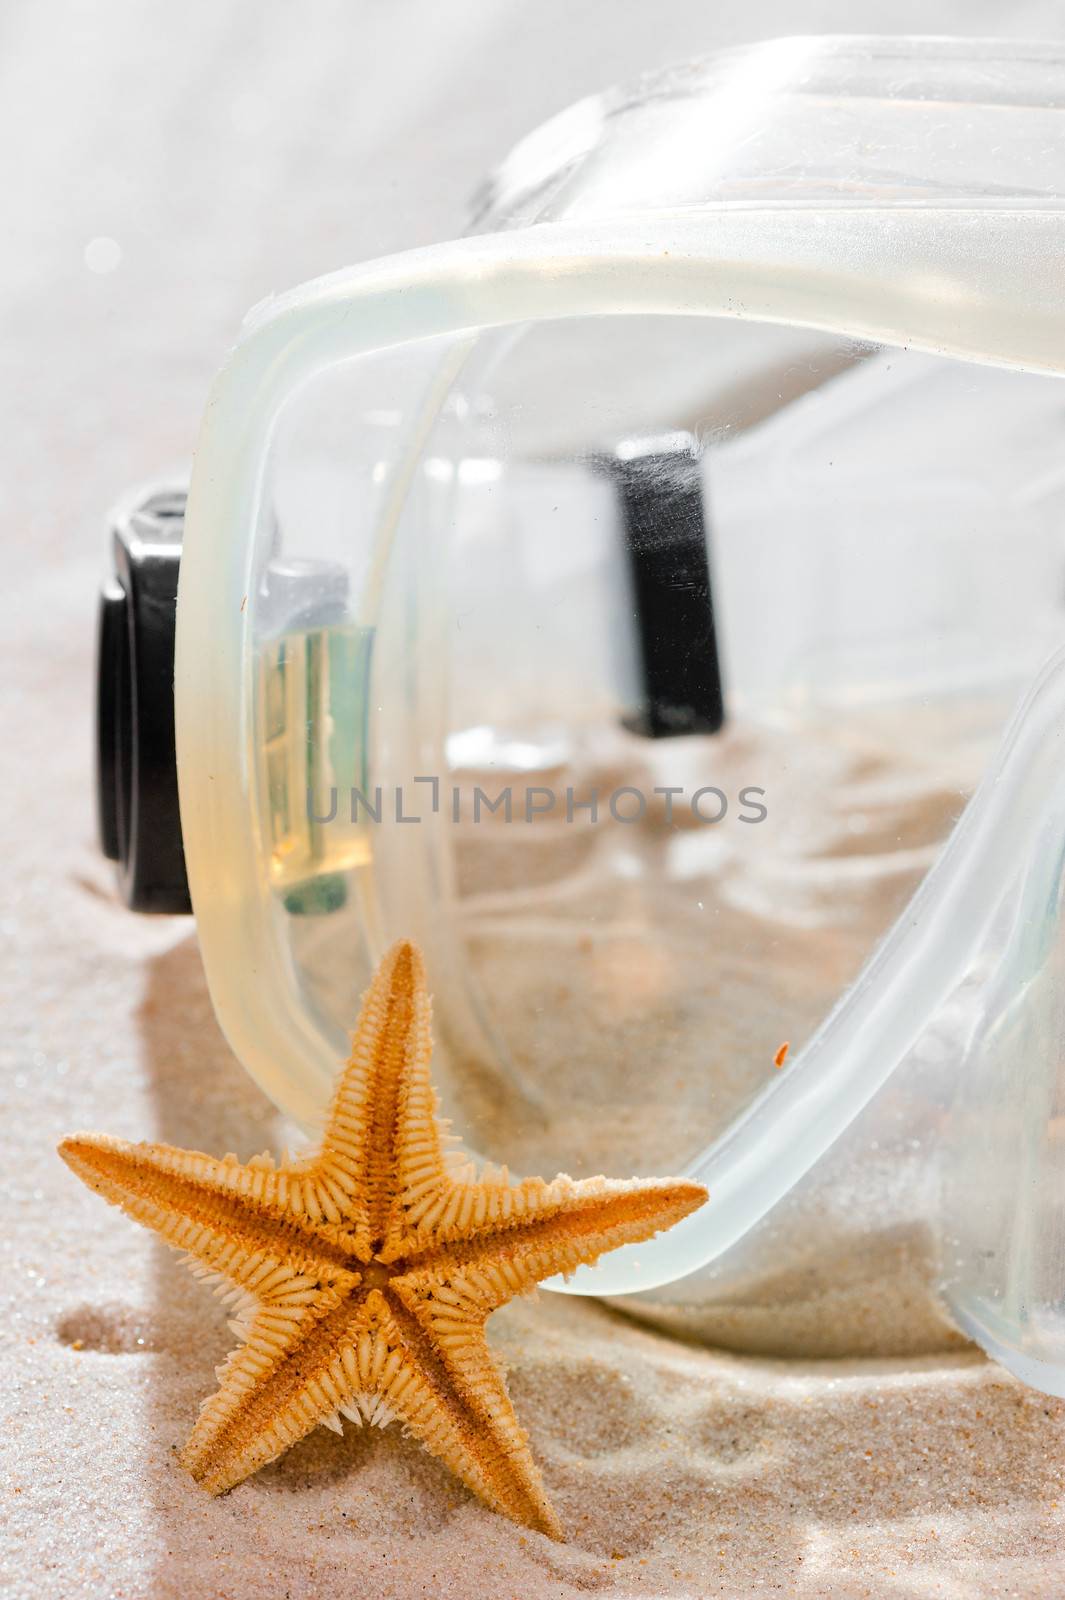 mask for snorkeling and starfish on dry sand by kosmsos111